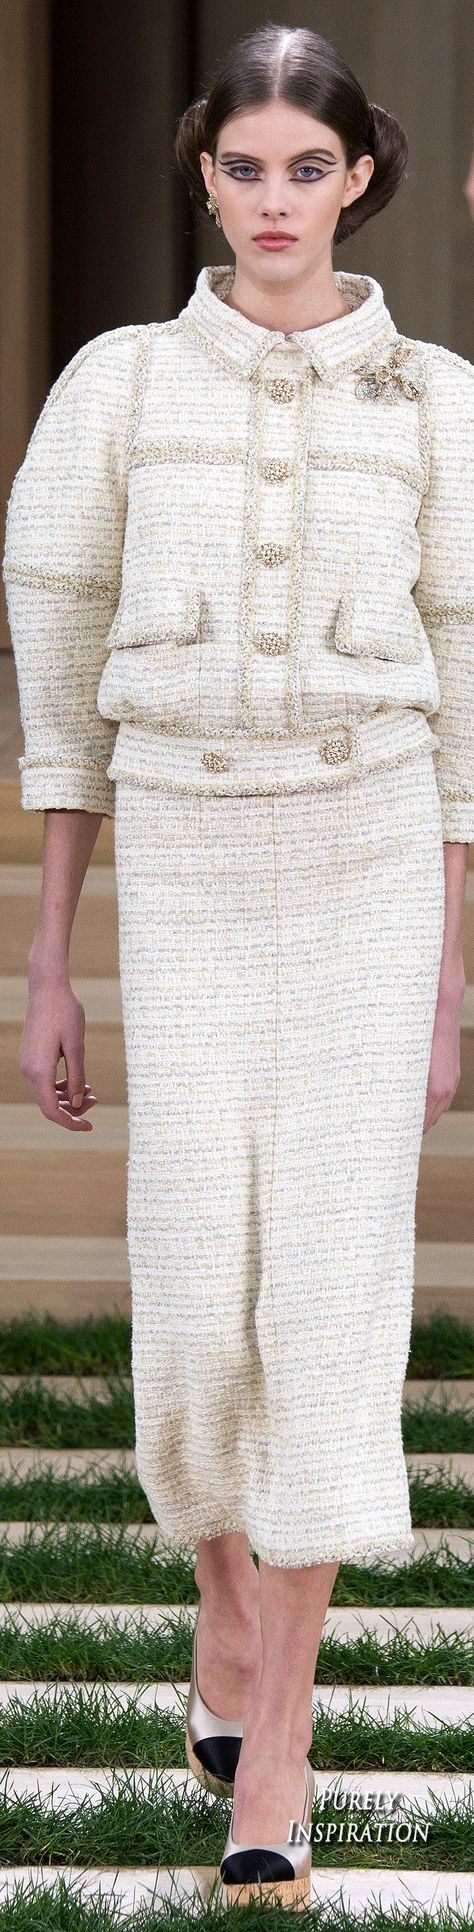 Chanel Spring 2016 Haute Couture | Purely Inspiration Outfits, Chanel, Karl Lagerfeld, Couture, Haute Couture, Chanel Spring 2016, Chanel Couture, Chanel Spring, Chanel Fashion